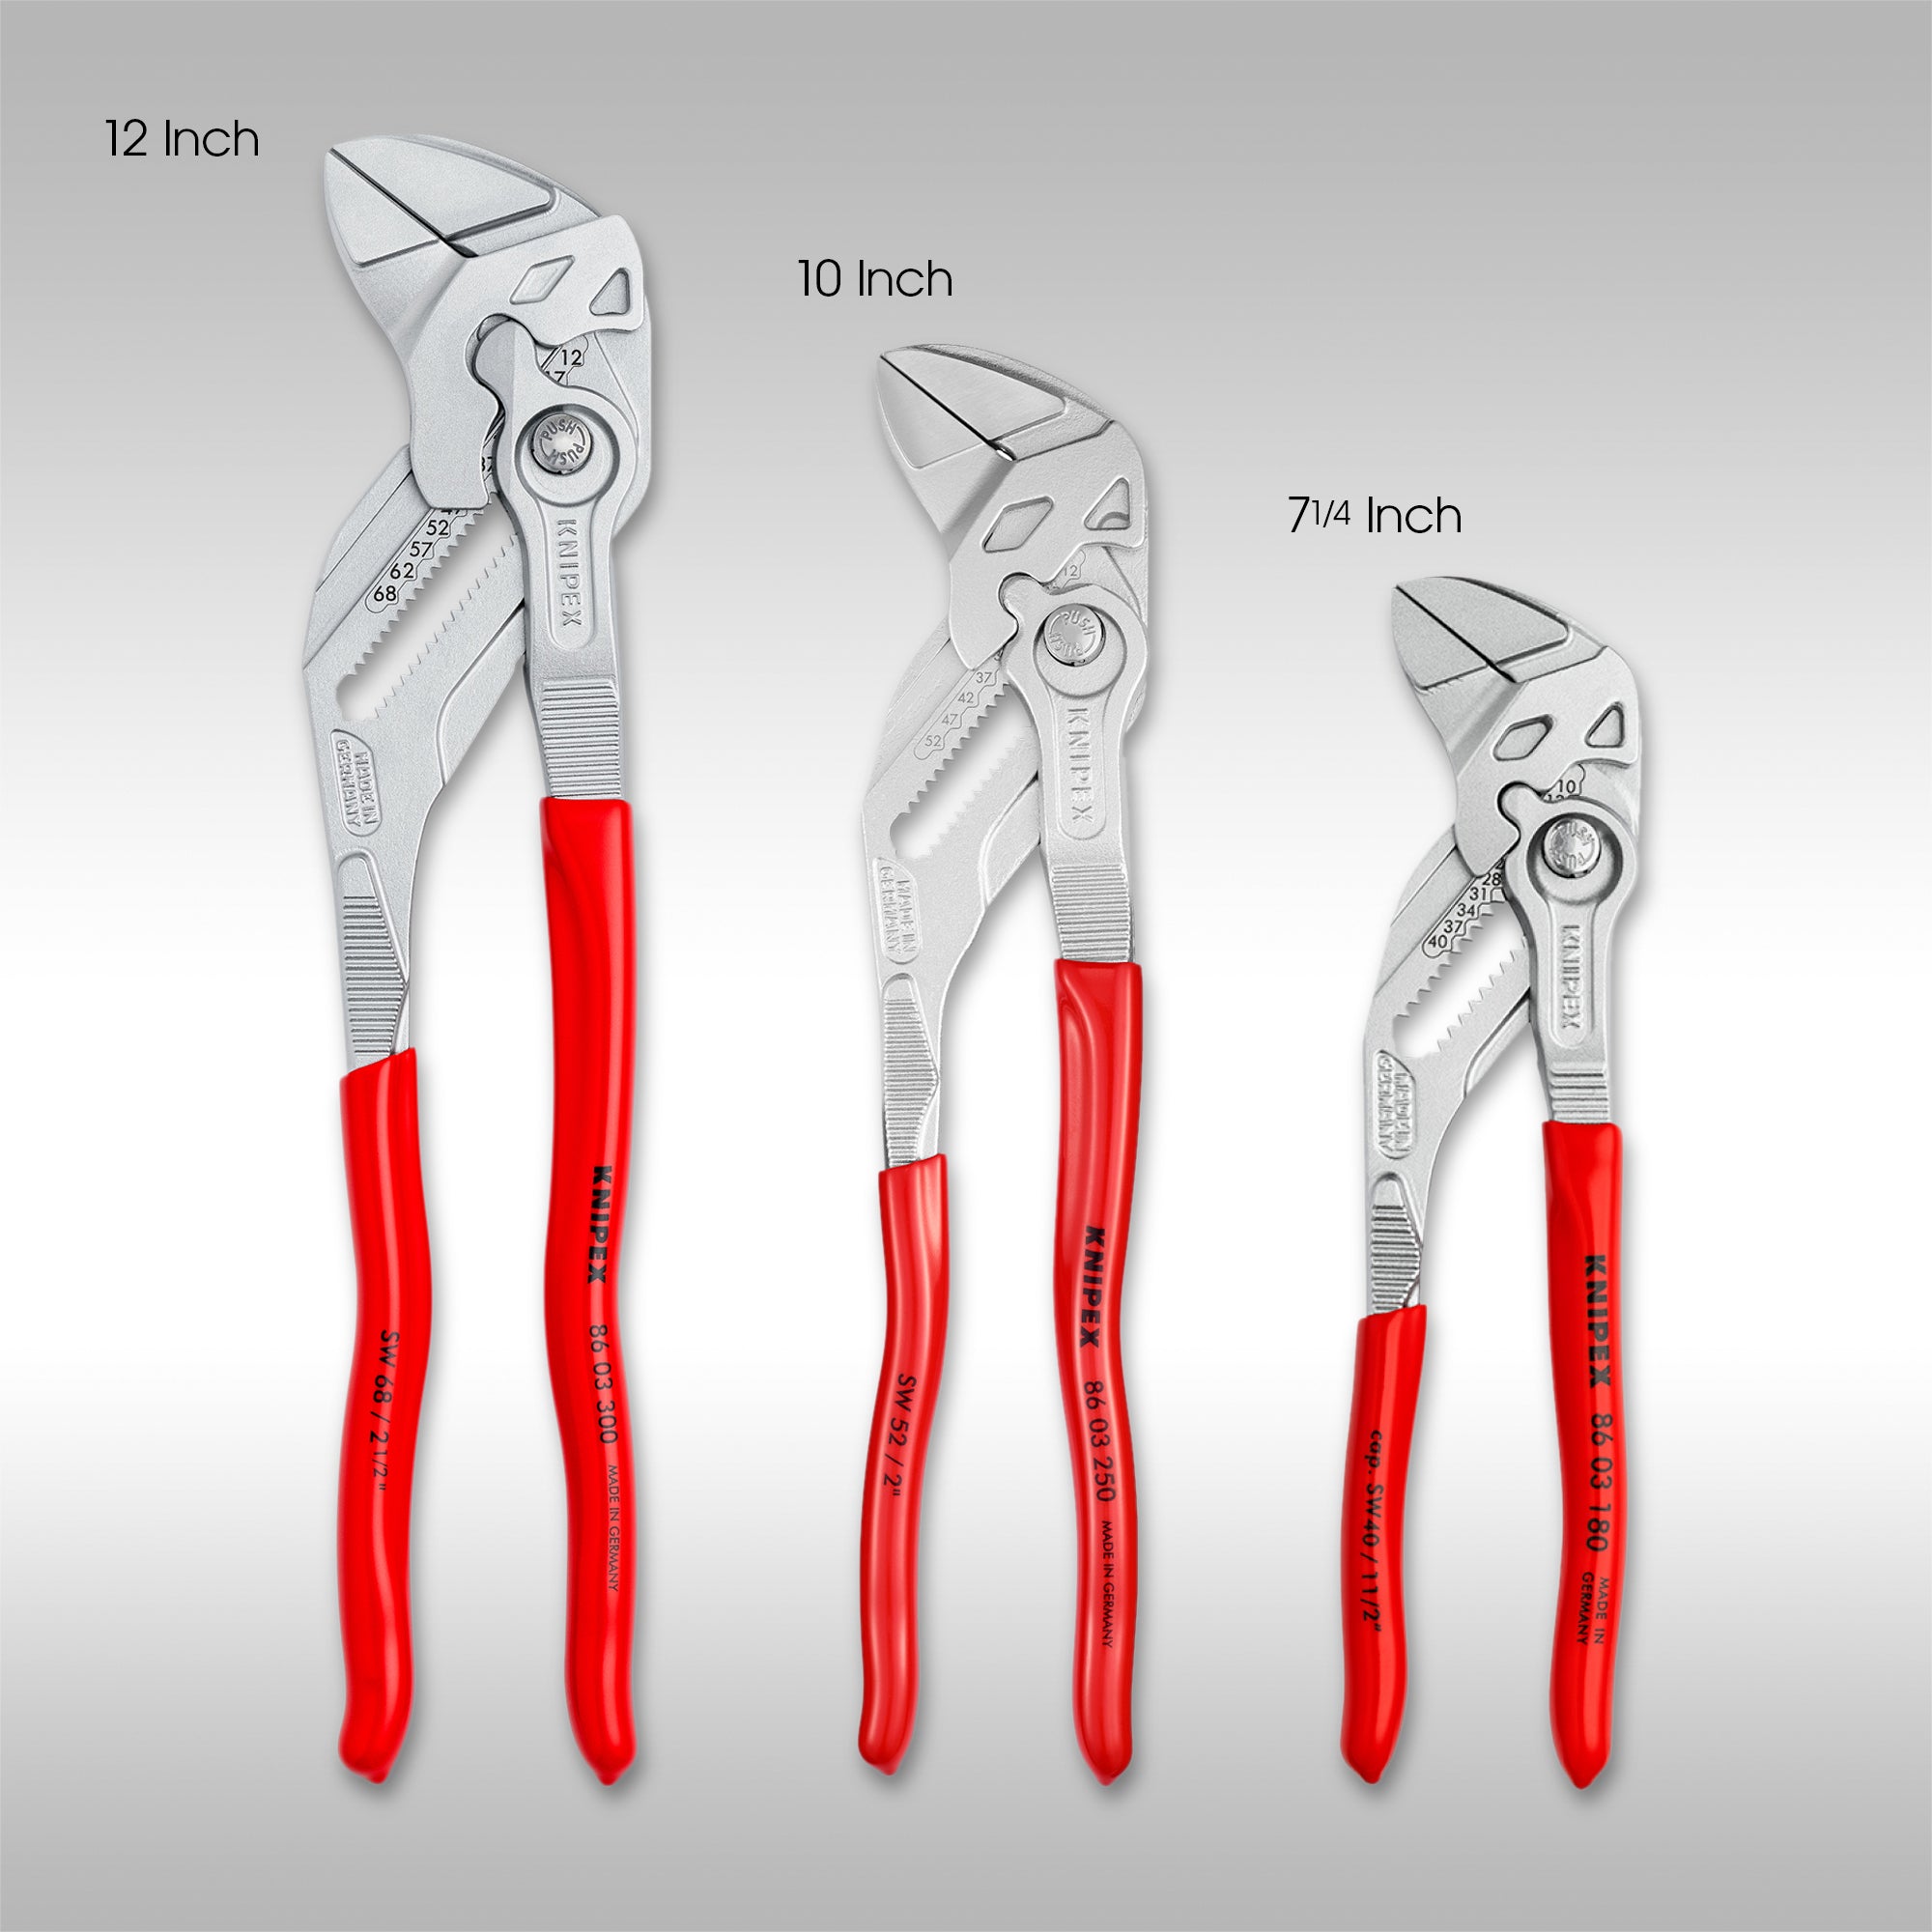 KNIPEX - 3PC PLIERS WRENCH SET - 7 1/4", 10", 12"